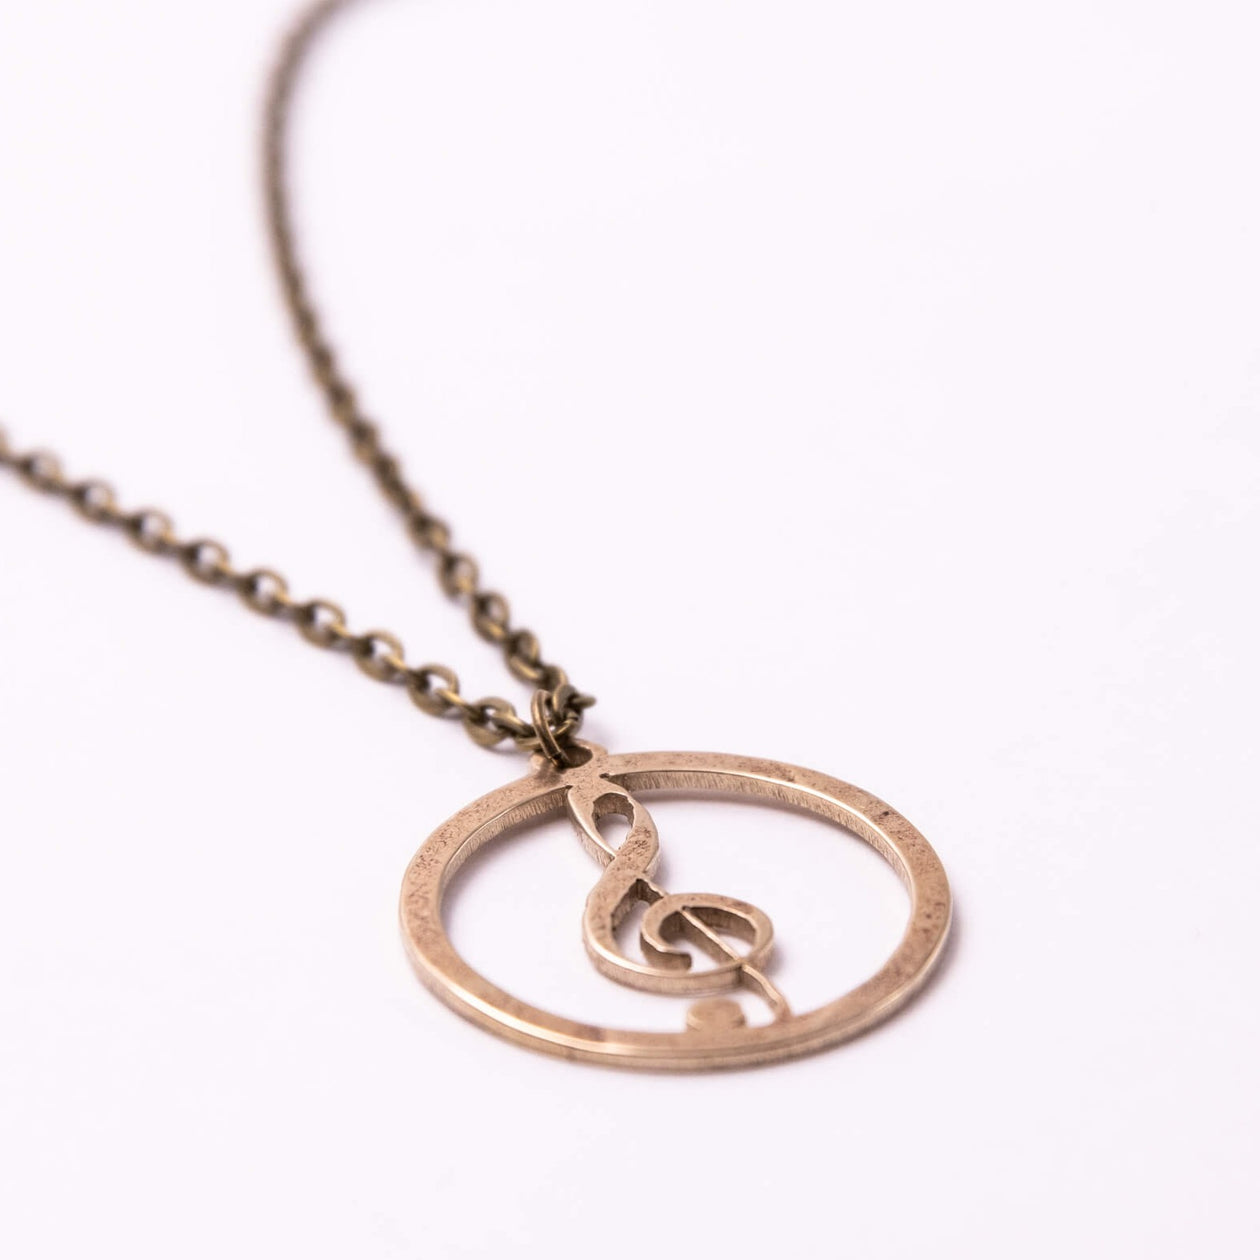 Treble - Reclaimed Cymbal Necklace